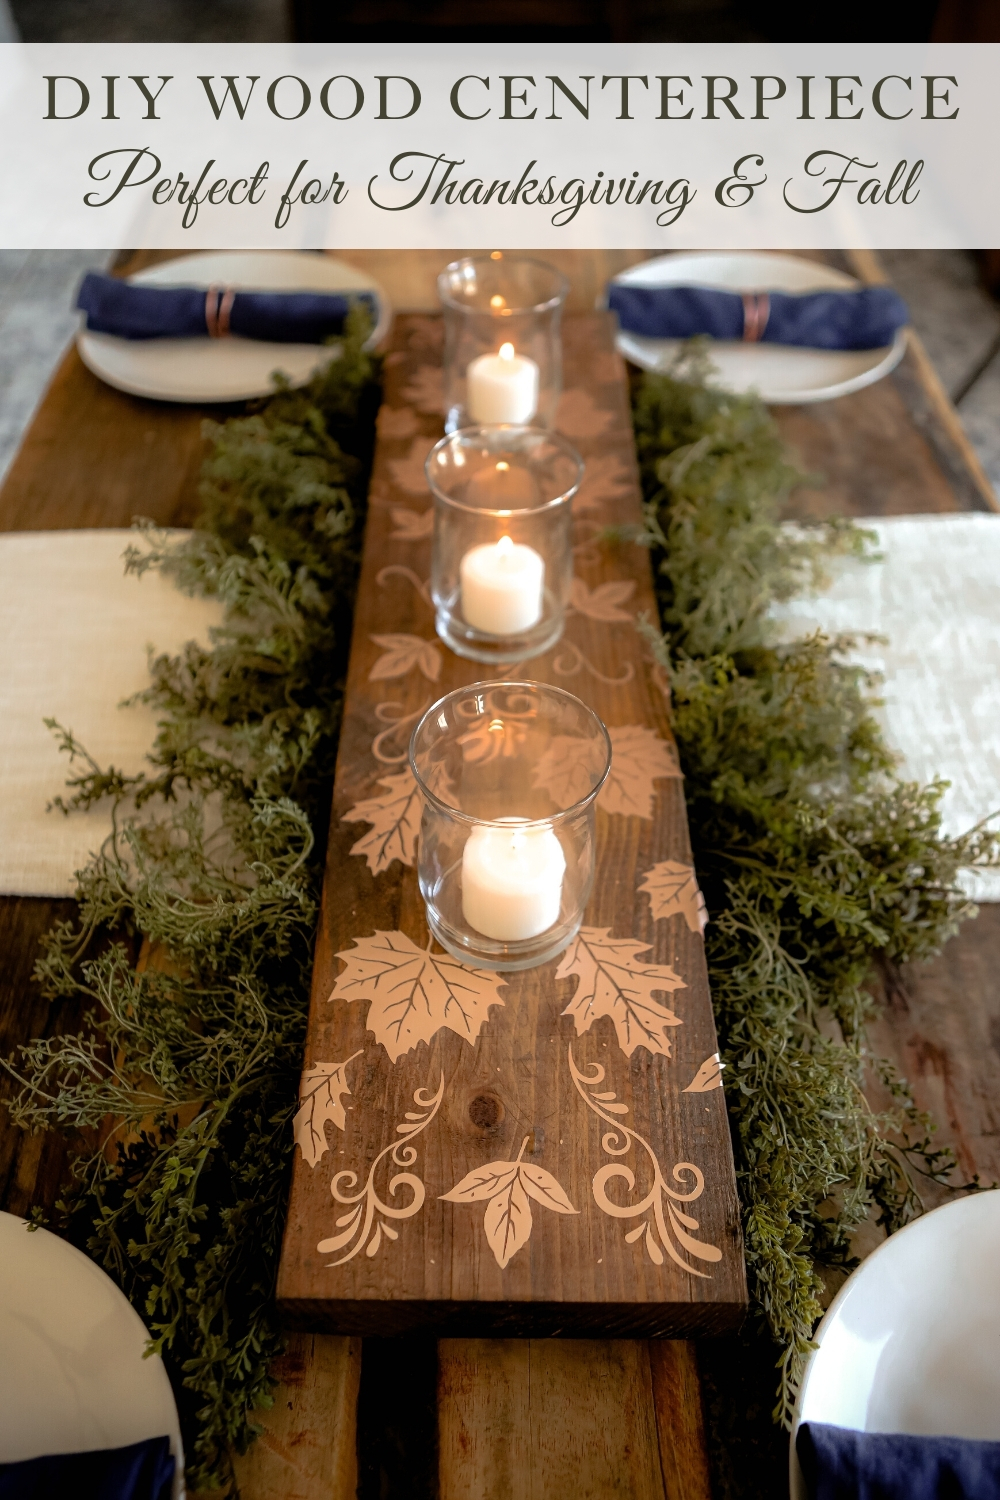 DIY Wood Centerpiece with Cricut Adhesive Foil for Thanksgiving Centerpiece and fall centerpiece